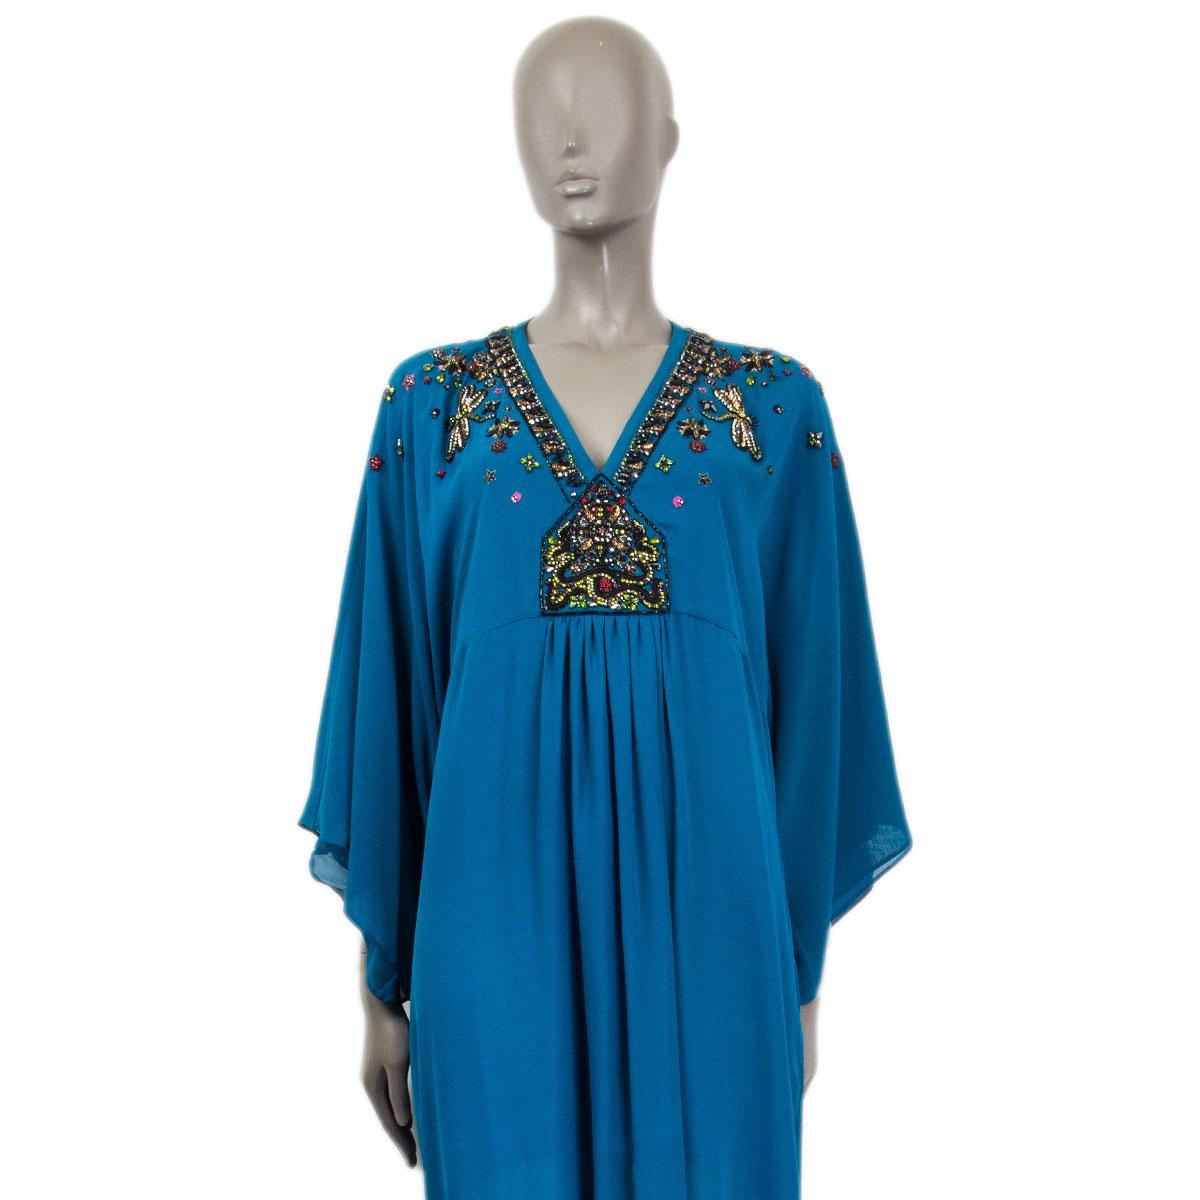 100% authentic Roberto Cavalli caftan dress with crystal embellishment in petrol green silk (100%) with a v neck-line, a cut under the breast and pleated front. Slip-in fit with a deep slit at the front. Semi-lined in petrol green silk (100%). Has